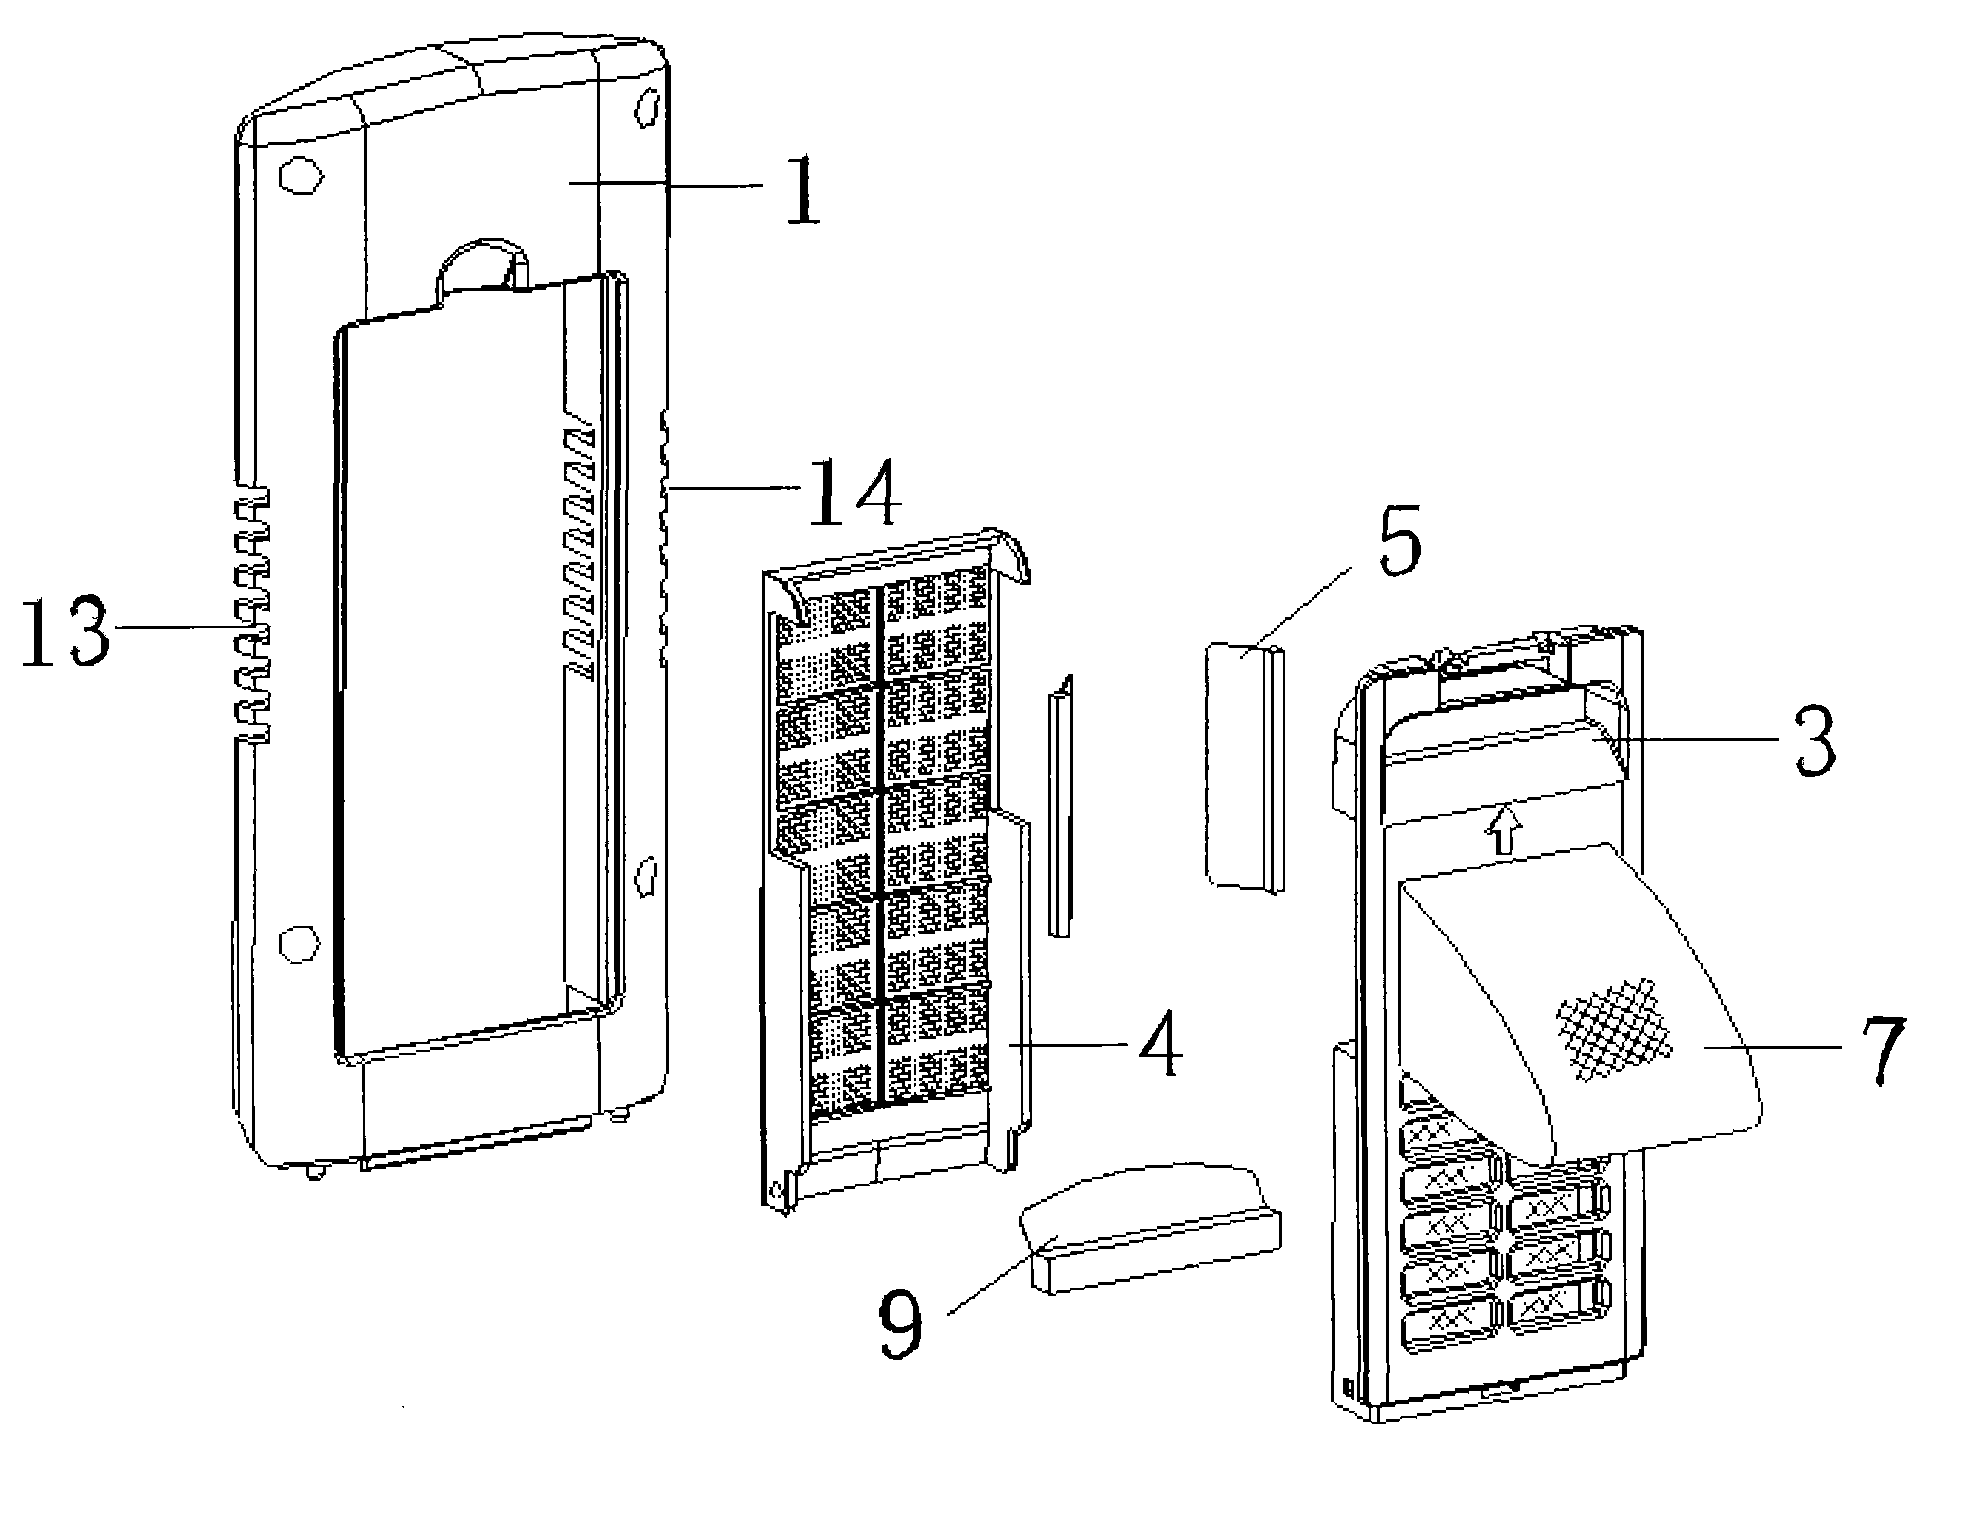 Omnidirectional filtering device for washing machine